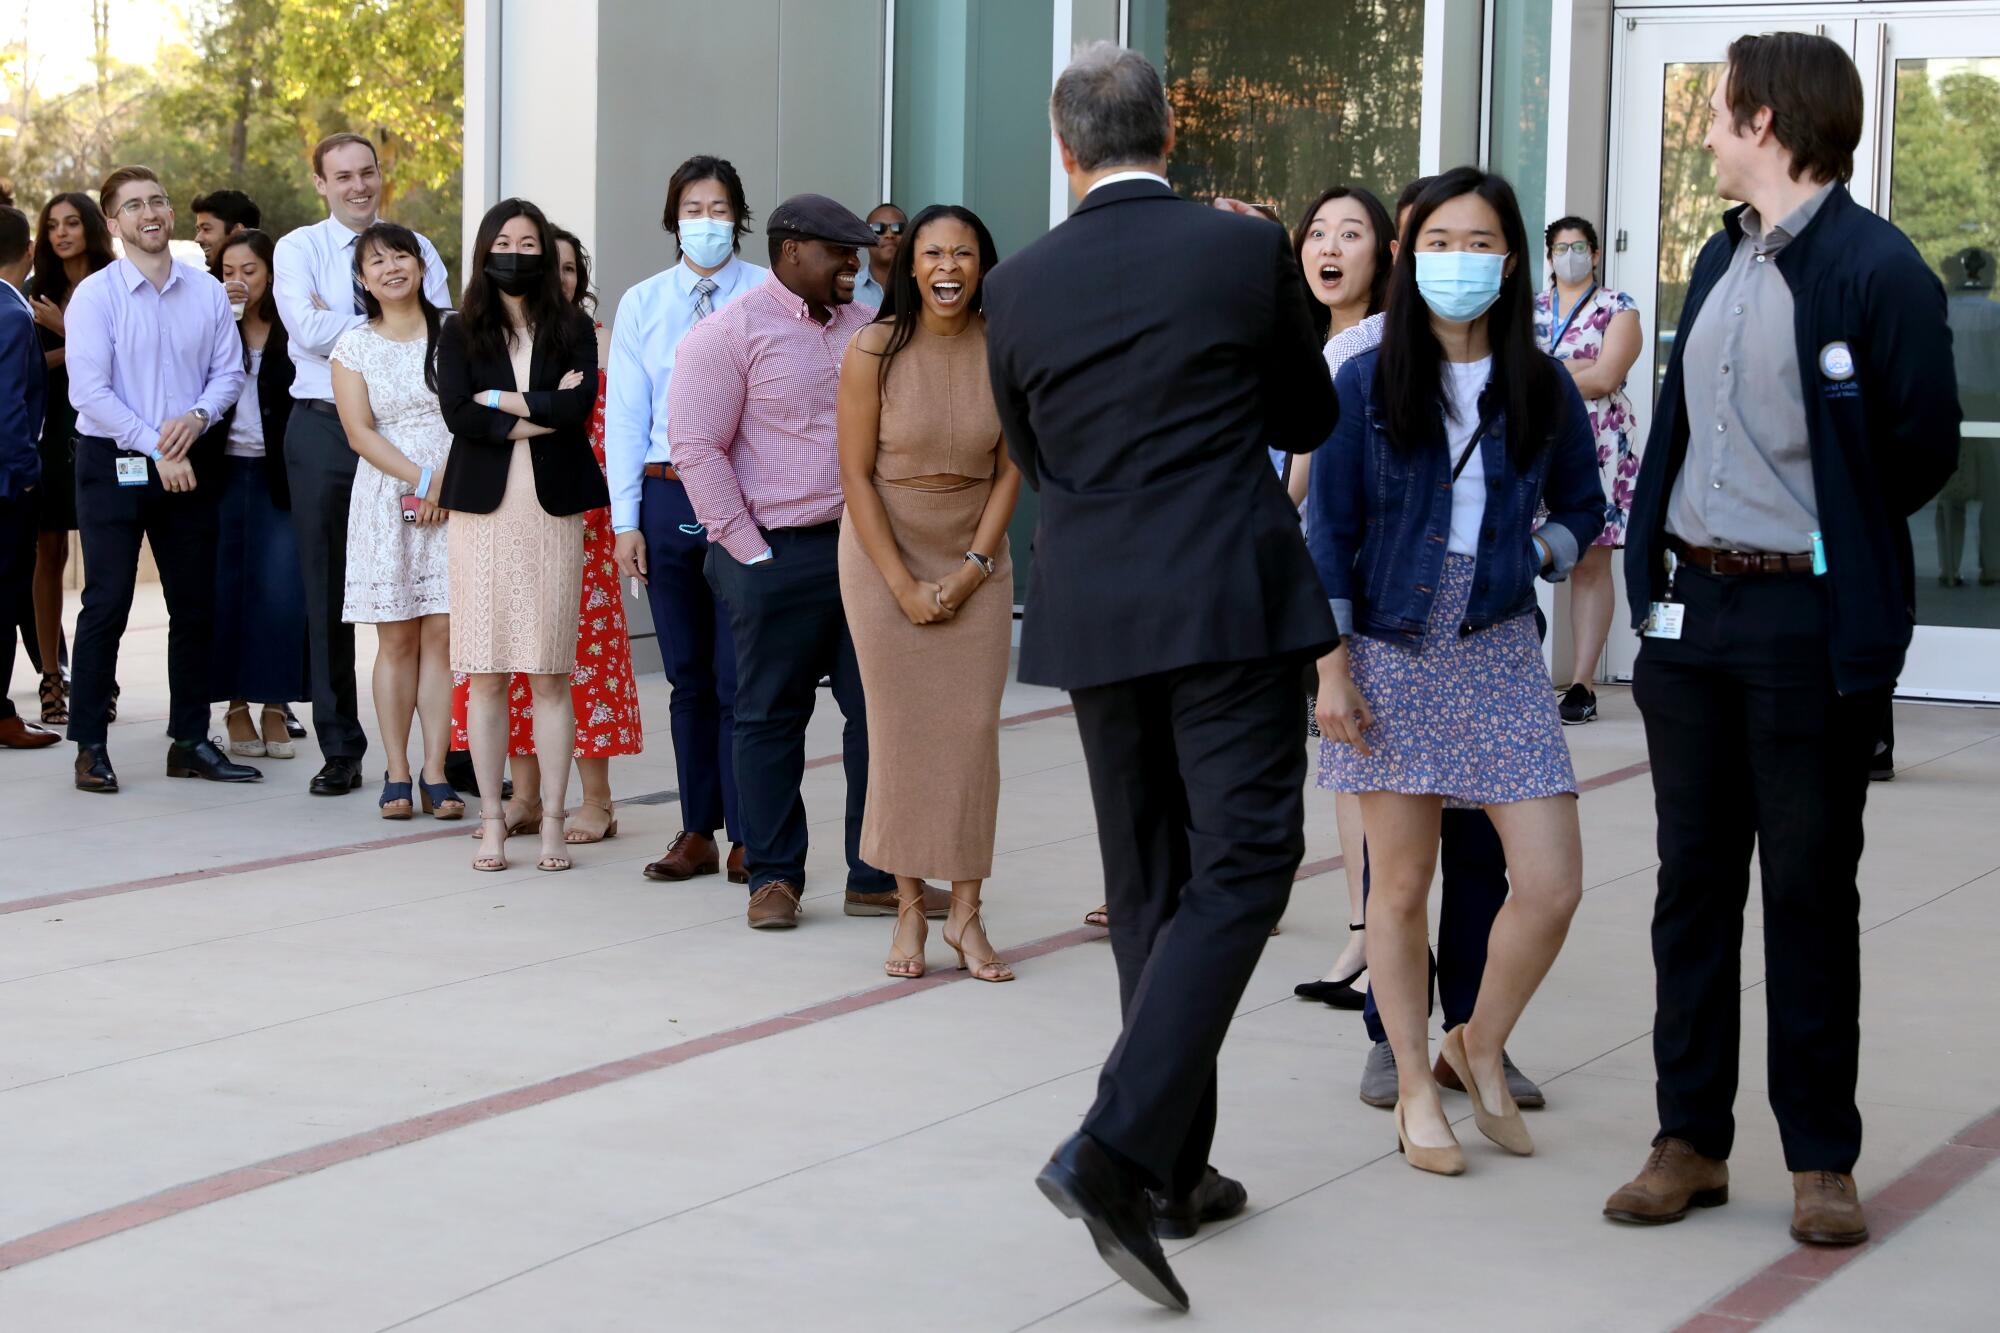 Medical students stand in line at UCLA